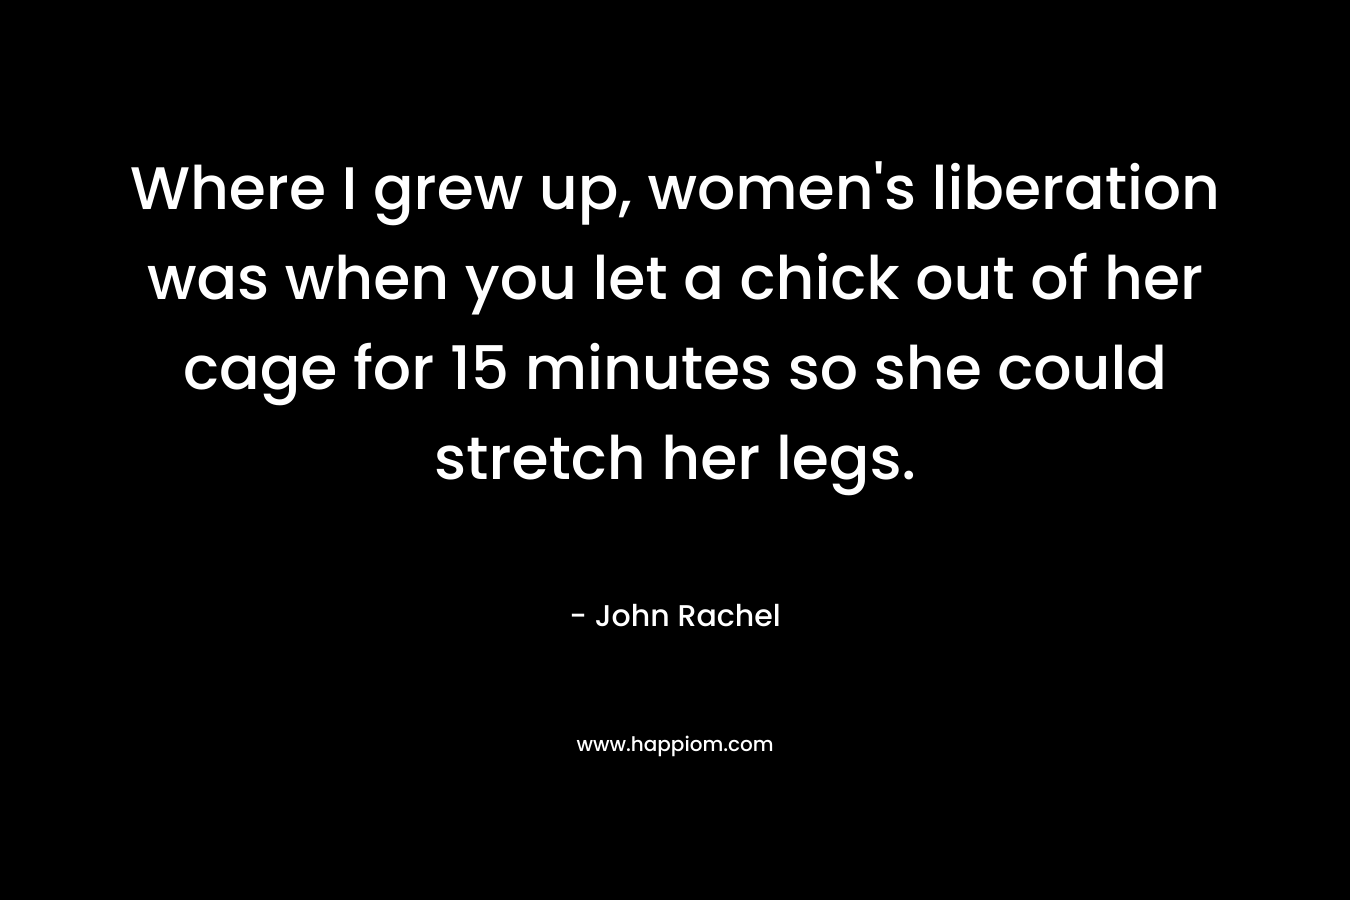 Where I grew up, women’s liberation was when you let a chick out of her cage for 15 minutes so she could stretch her legs. – John Rachel